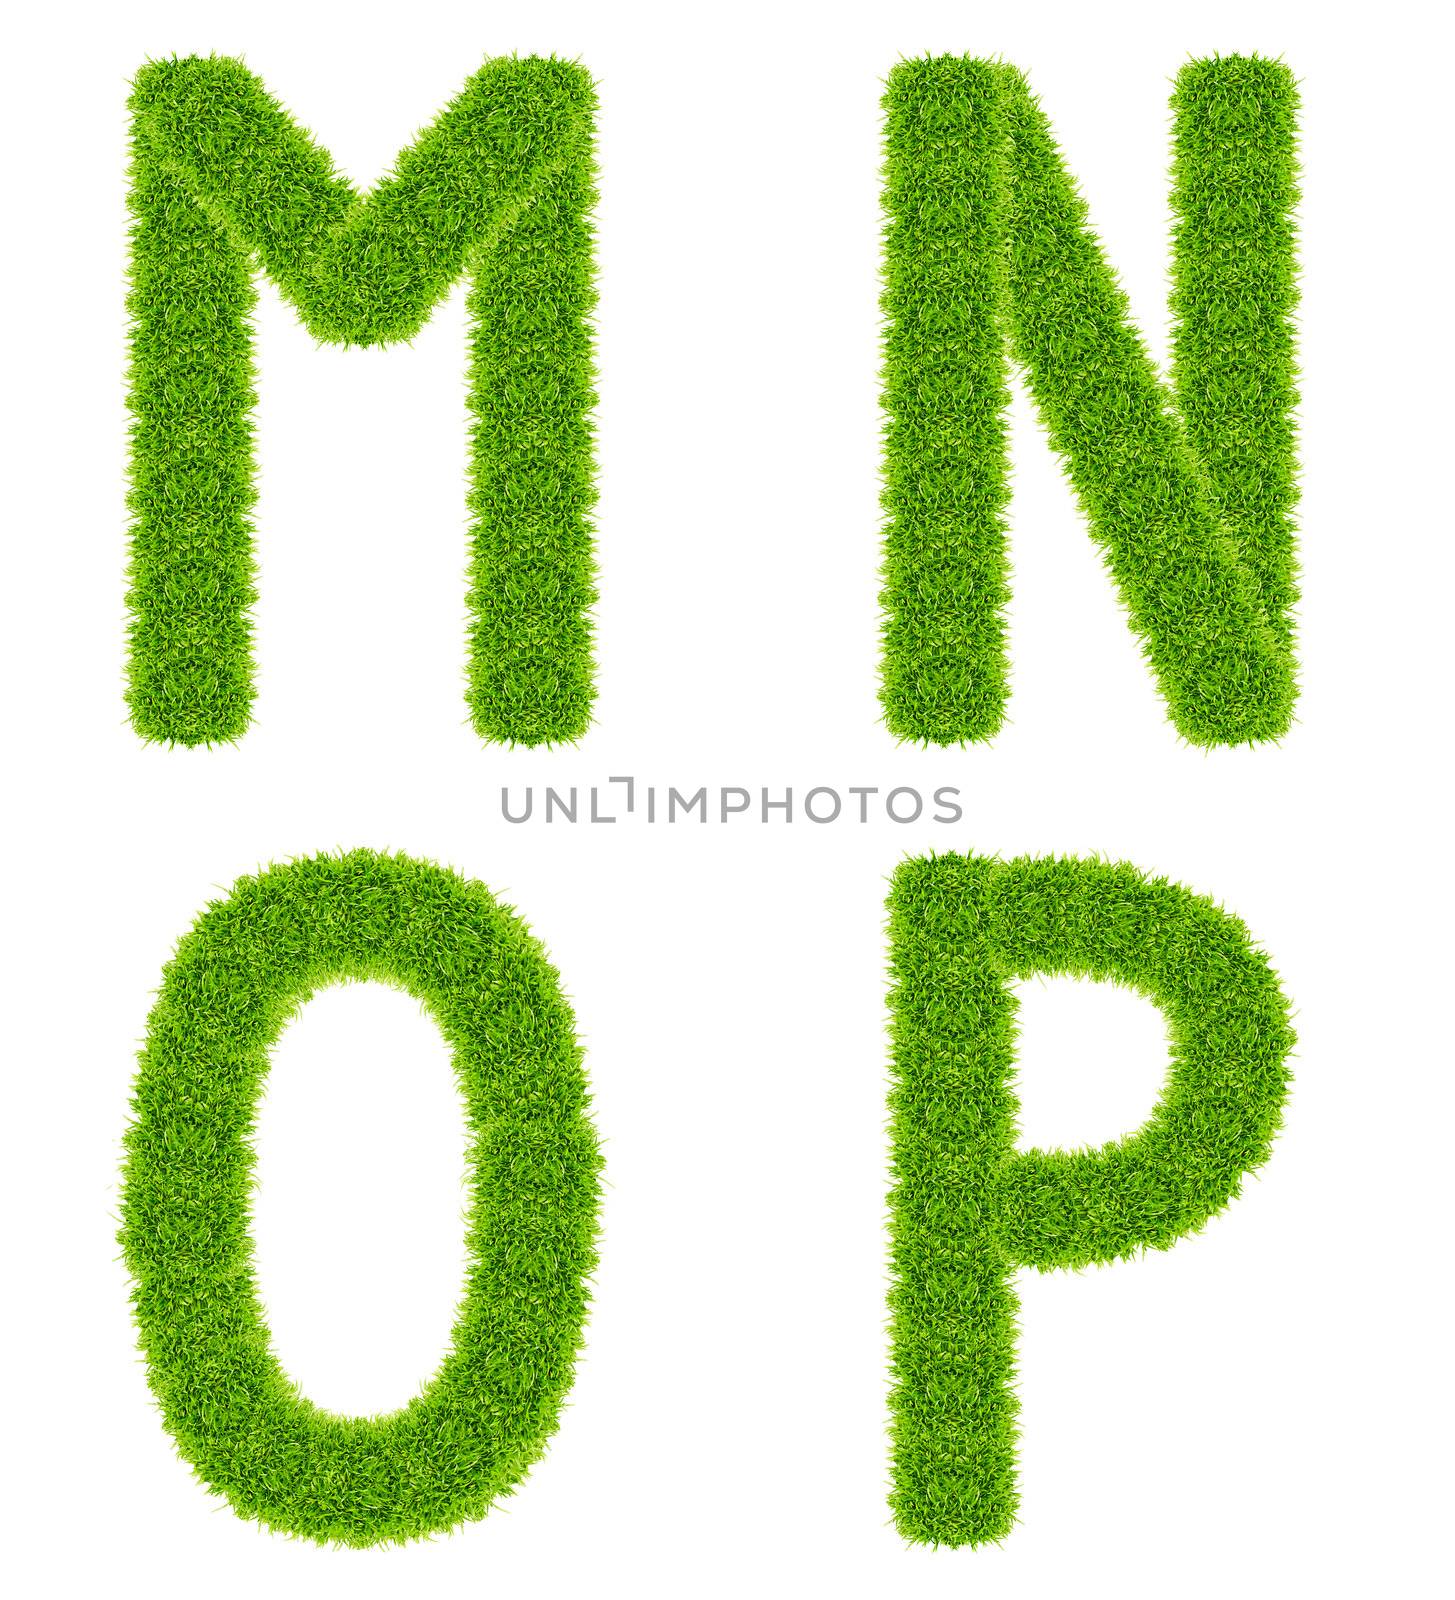 green grass letter mnop isolated by tungphoto